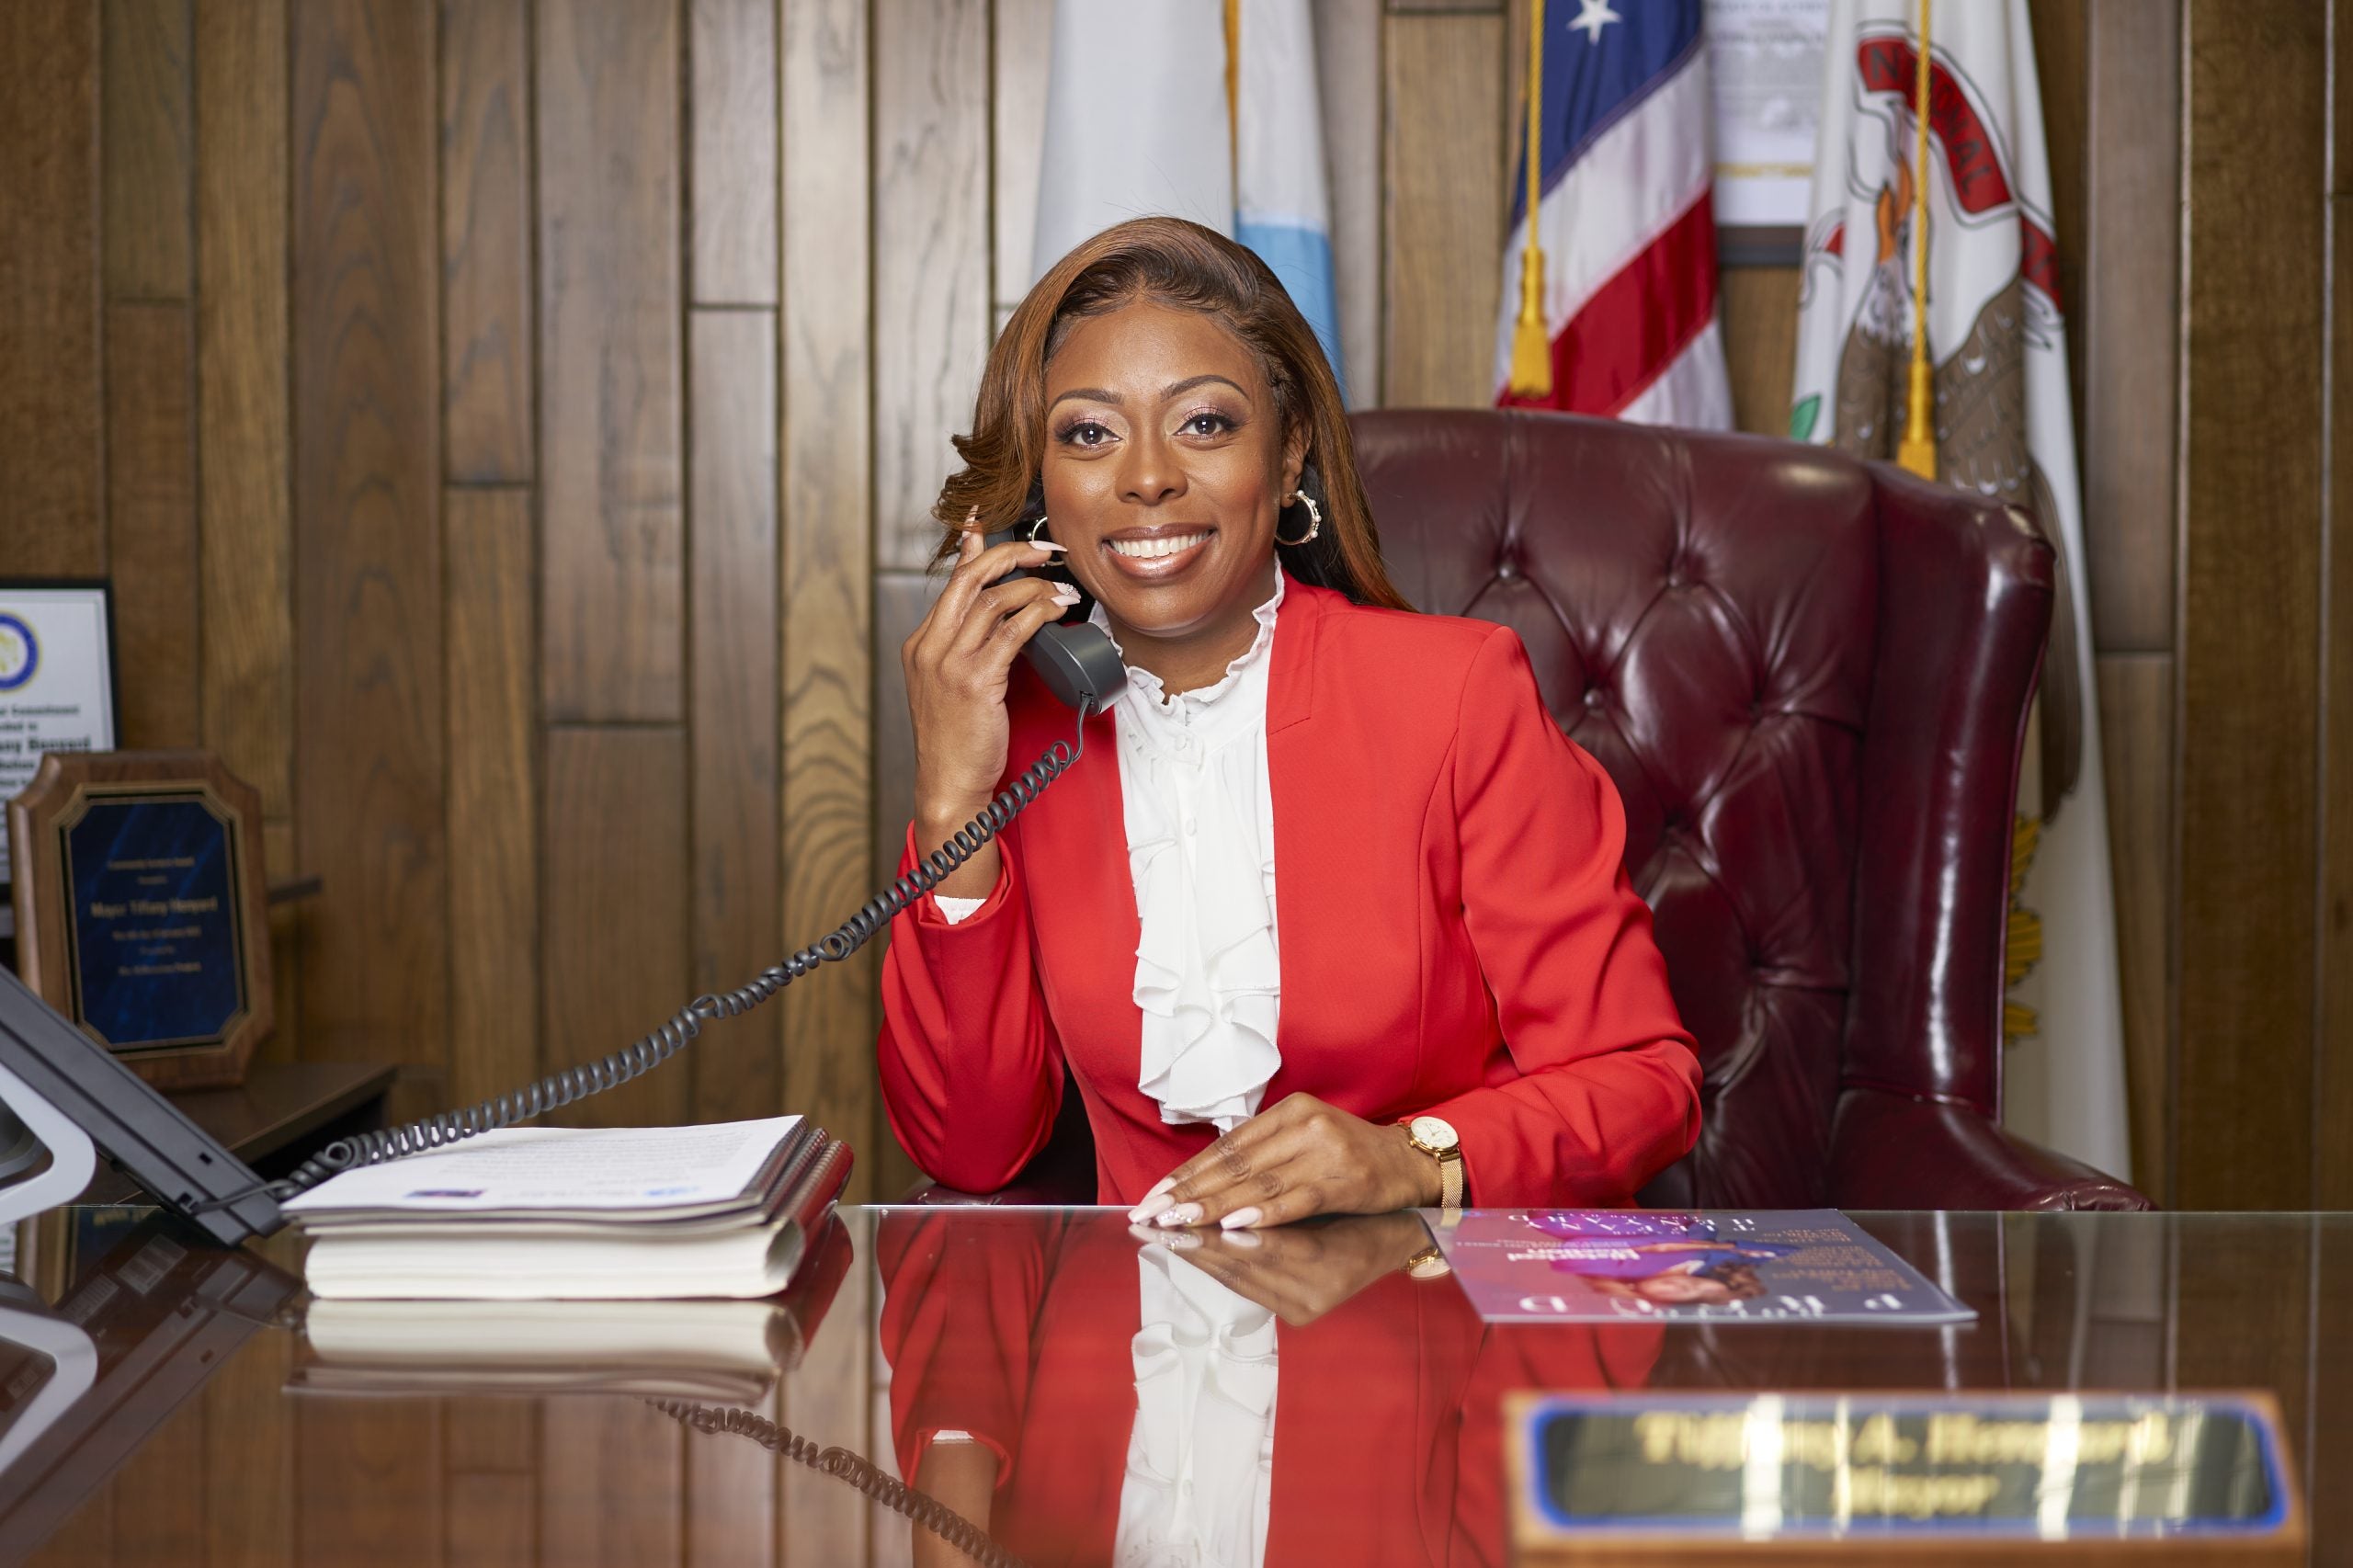 'It's About Generational Change:' Meet the Woman Who Became The Youngest And First Black Mayor Of A Chicagoland Town